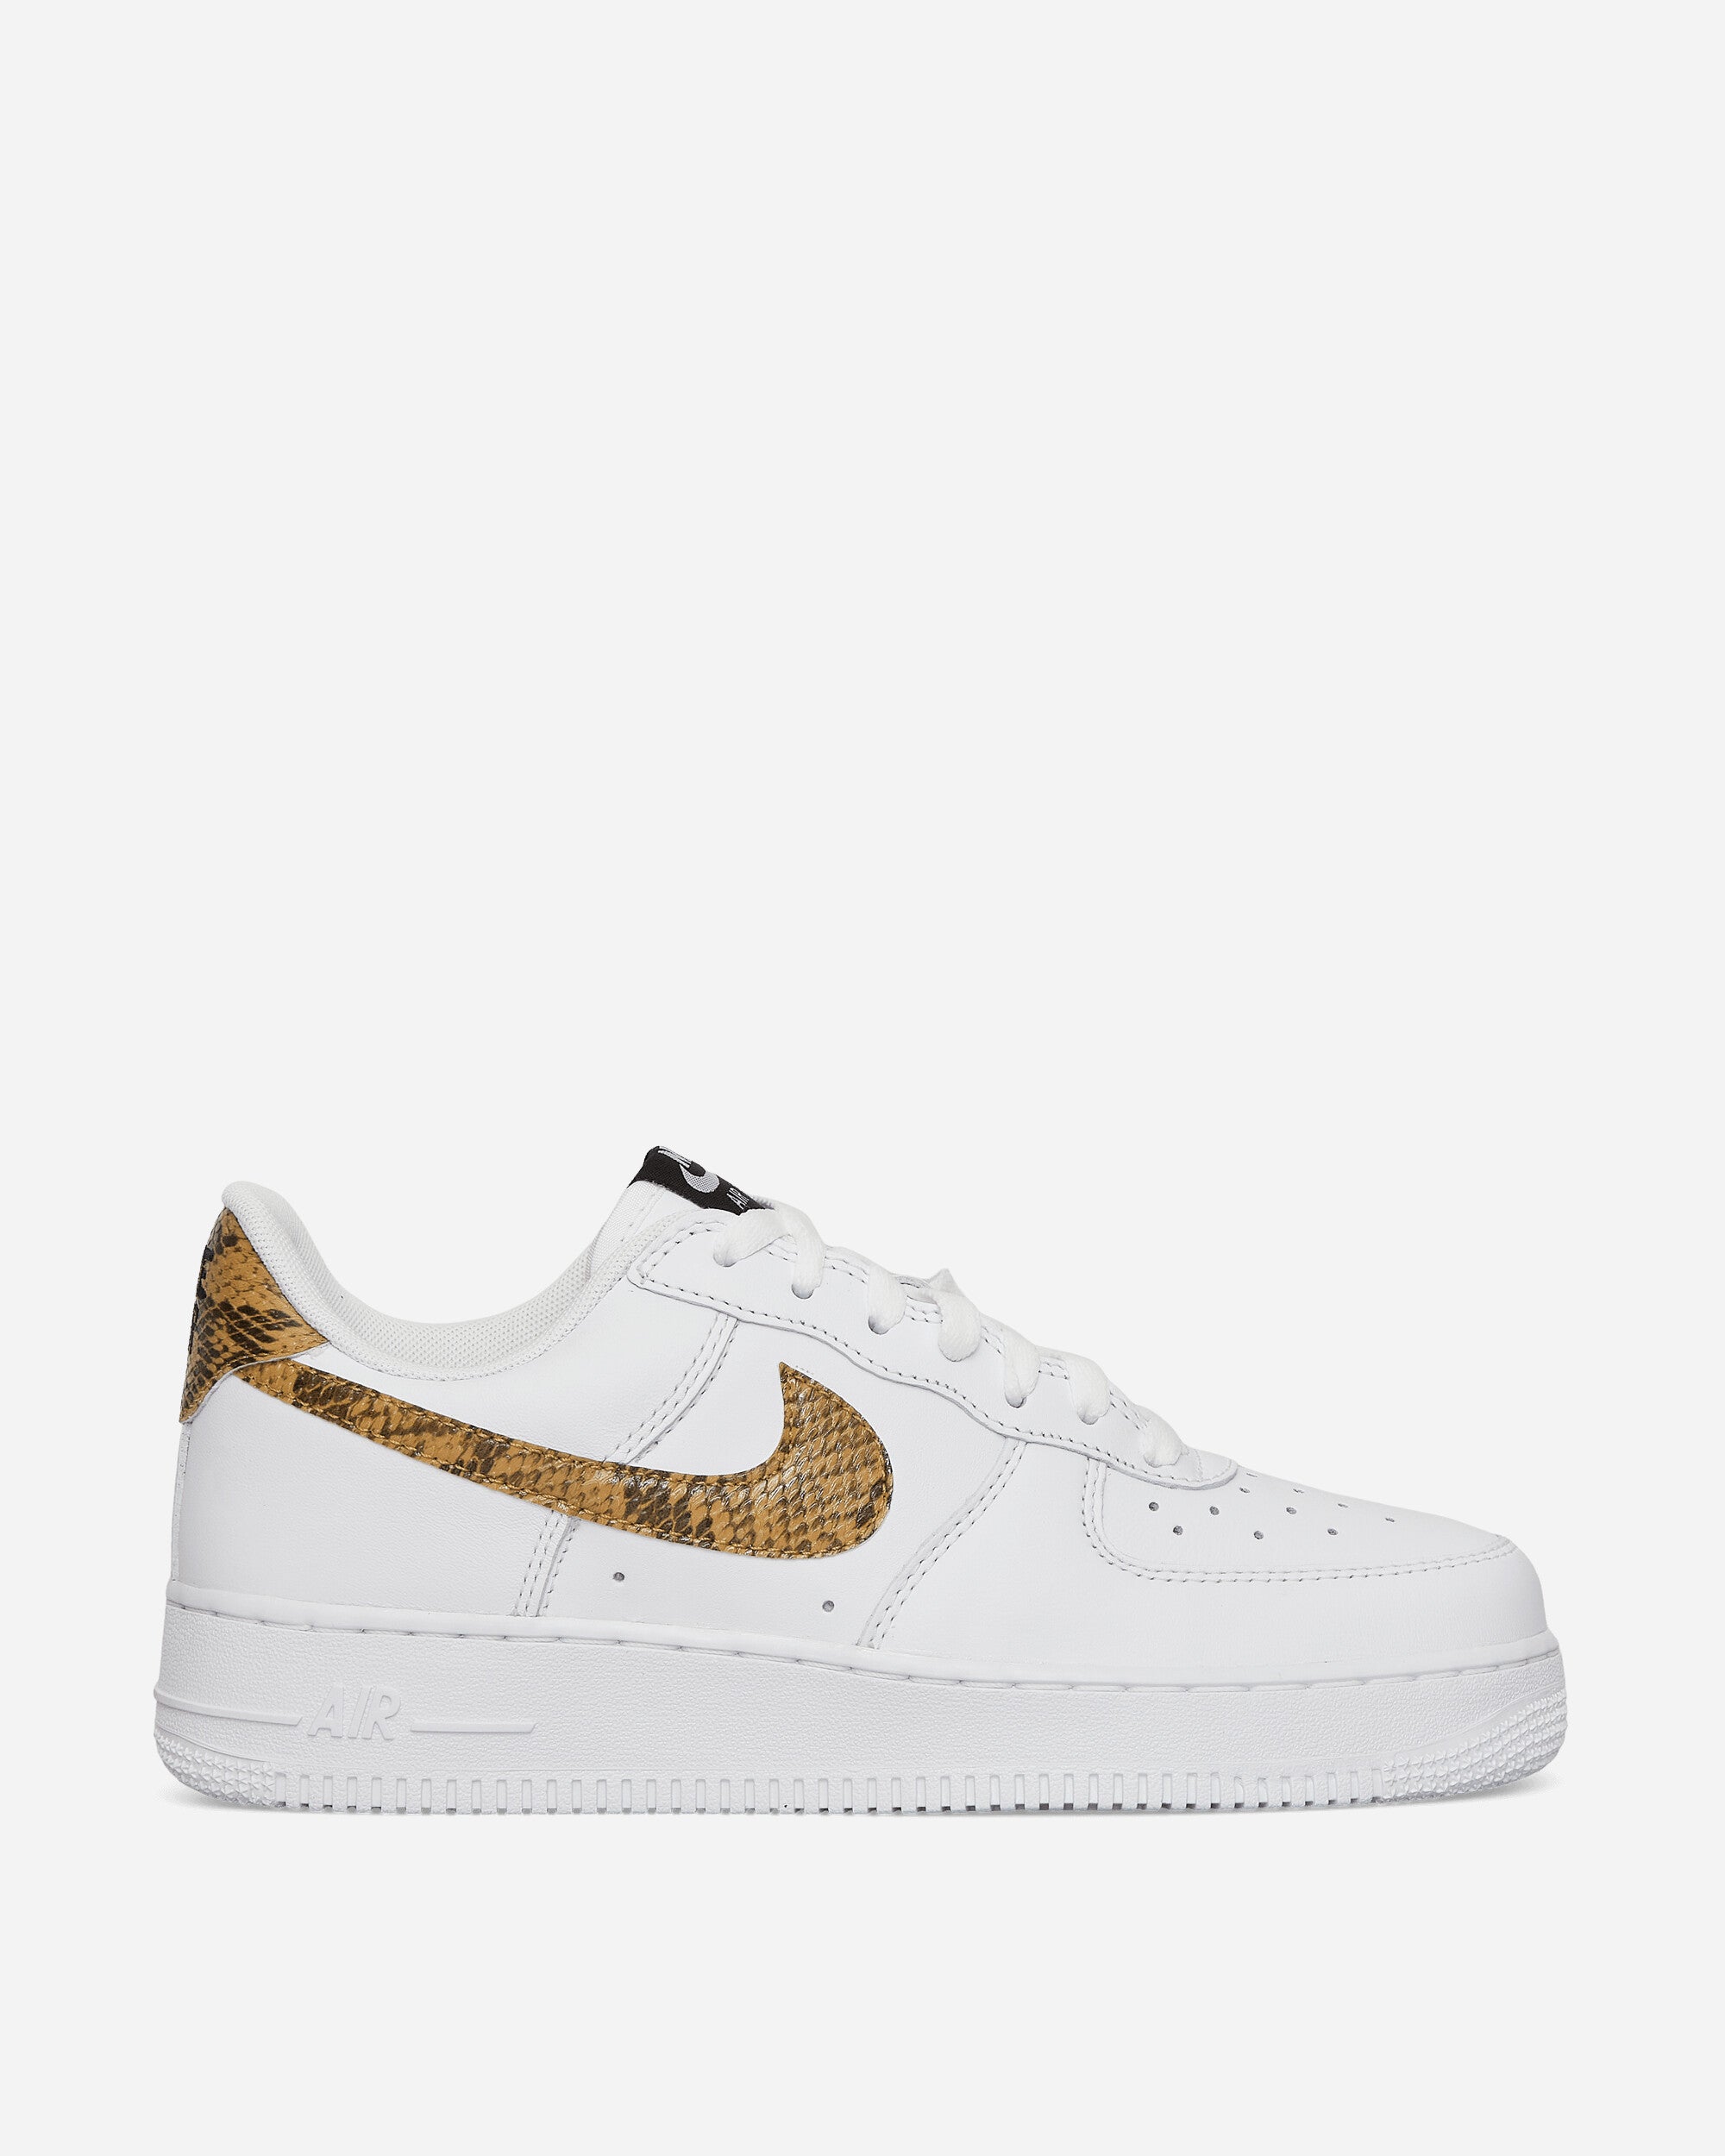 Nike Air Force 1 Low Retro Prm Qs White/Elemental Gold Sneakers Low AO1635-100